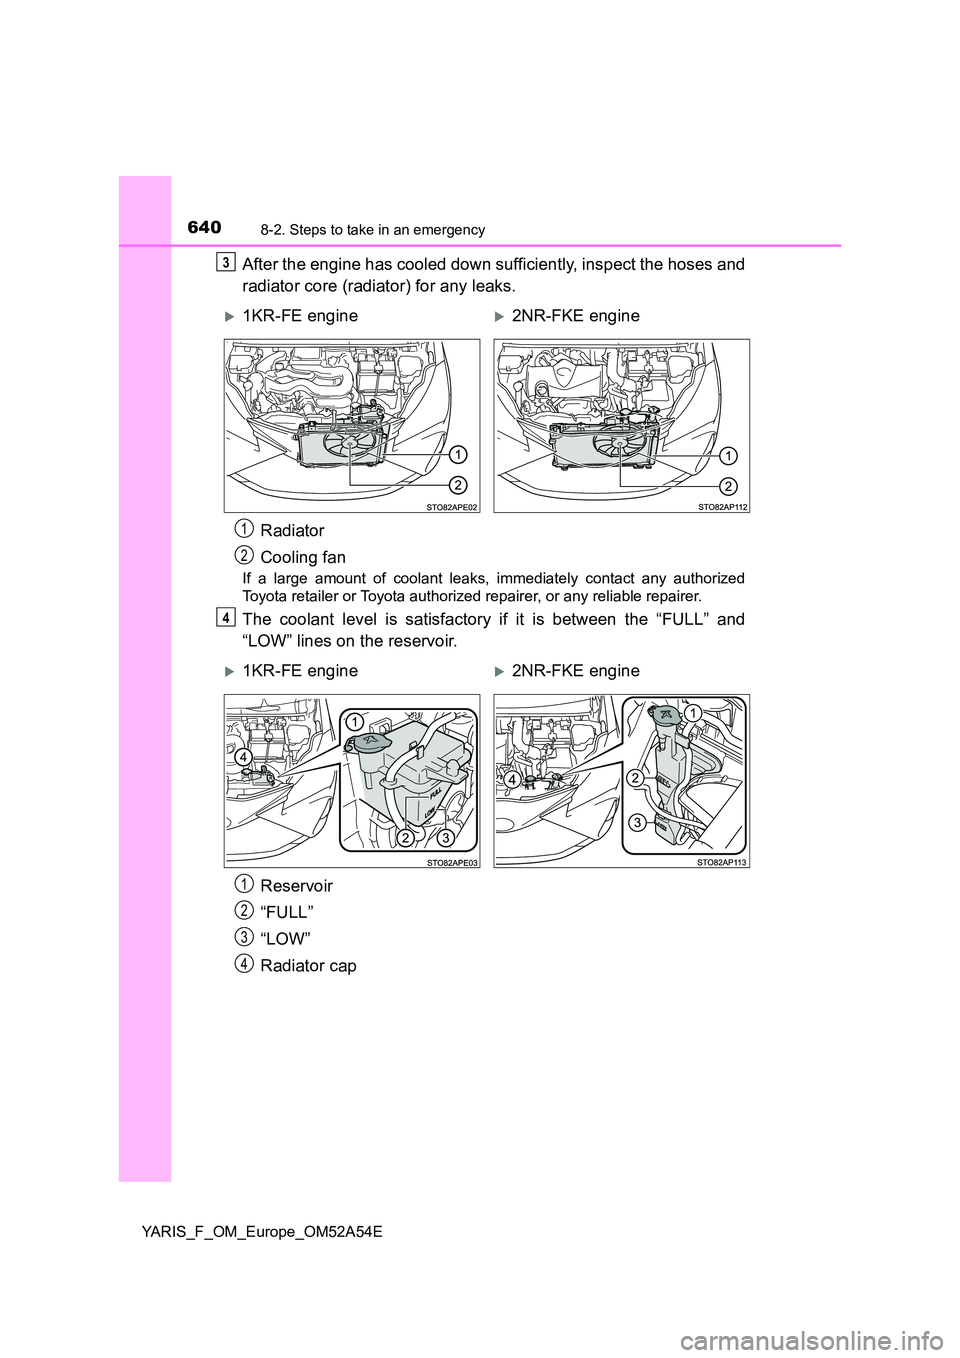 TOYOTA YARIS 2020  Owners Manual 6408-2. Steps to take in an emergency
YARIS_F_OM_Europe_OM52A54E
After the engine has cooled down sufficiently, inspect the hoses and 
radiator core (radiator) for any leaks.
If a large amount of cool